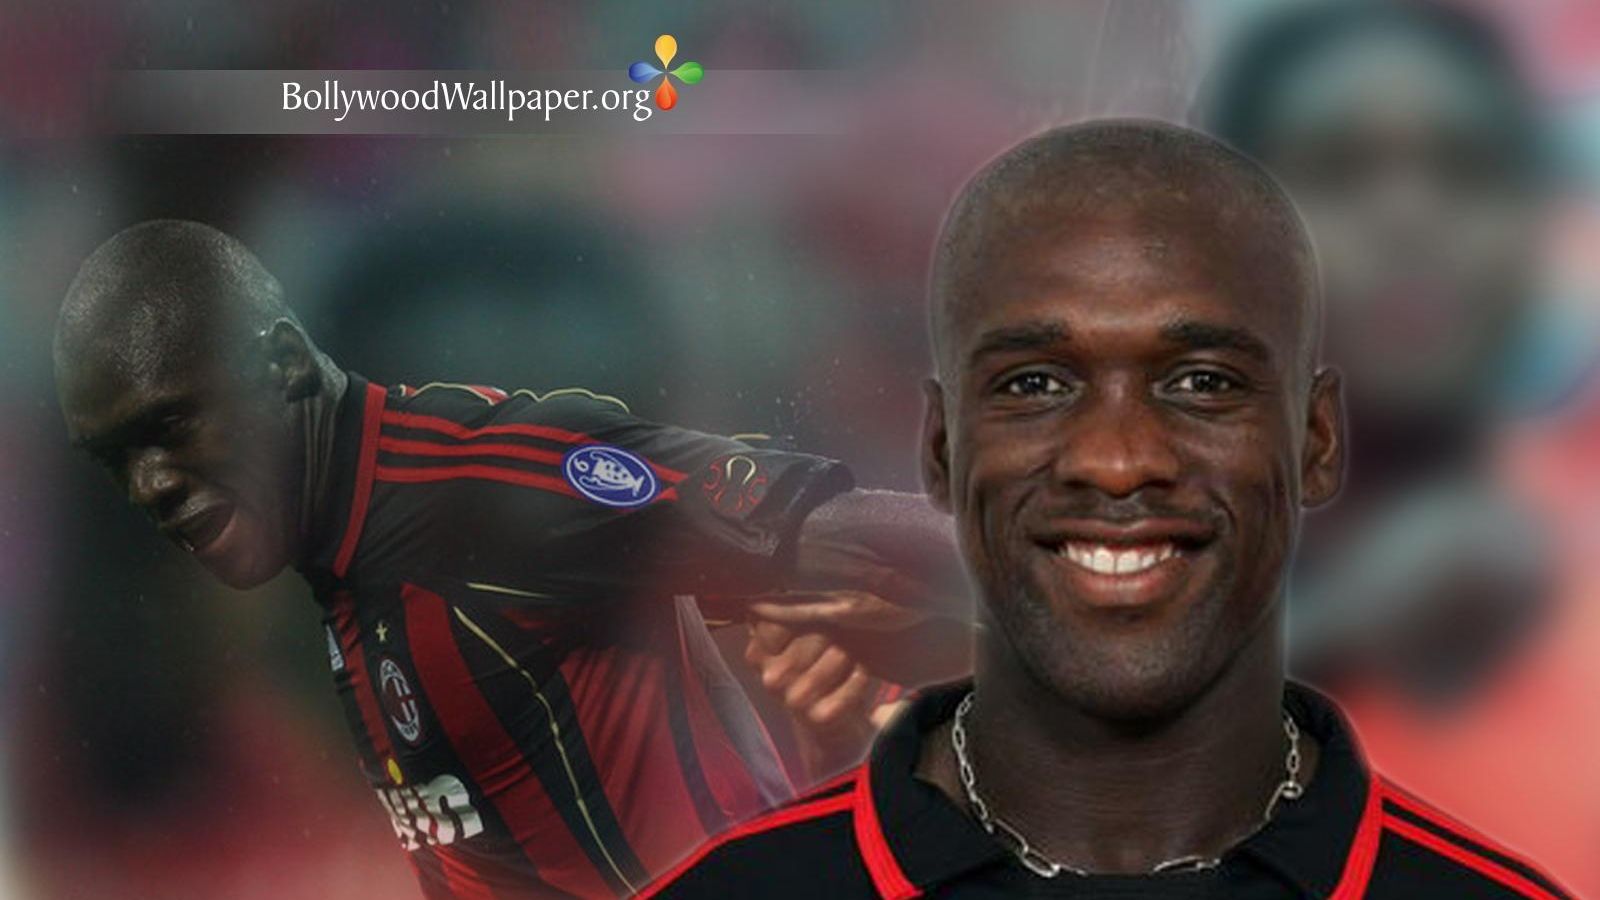 Free download wallpaper picture Clarence Seedorf Wallpaper 2011